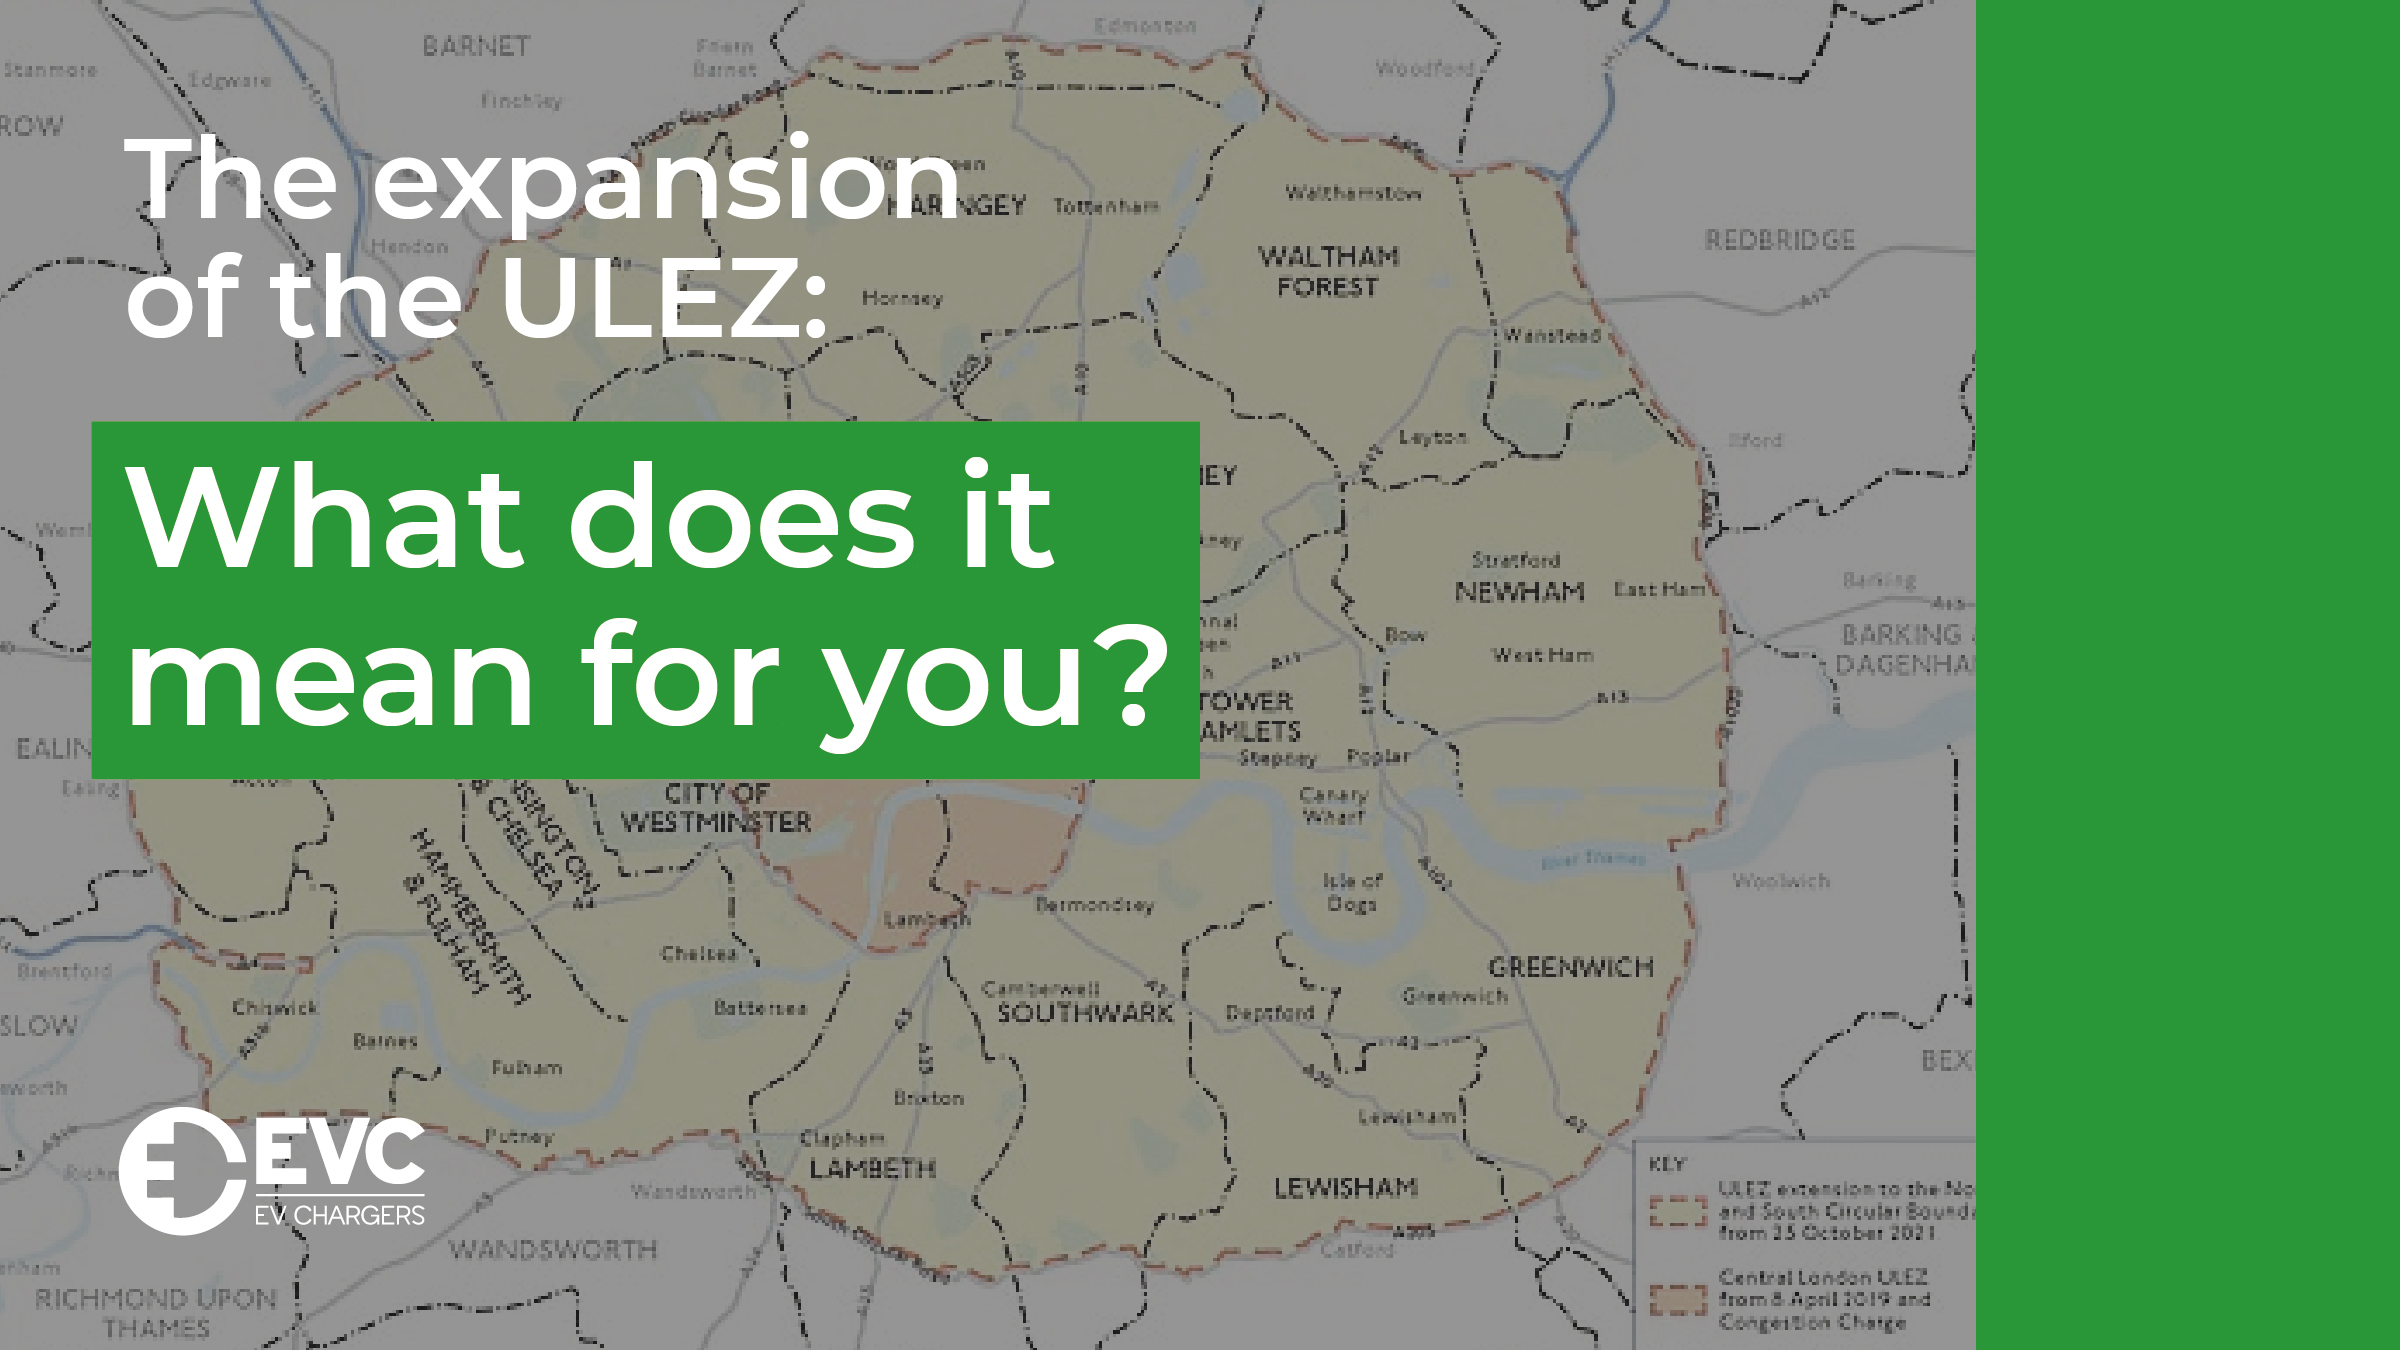 The expansion of the ULEZ: What does it mean for you?